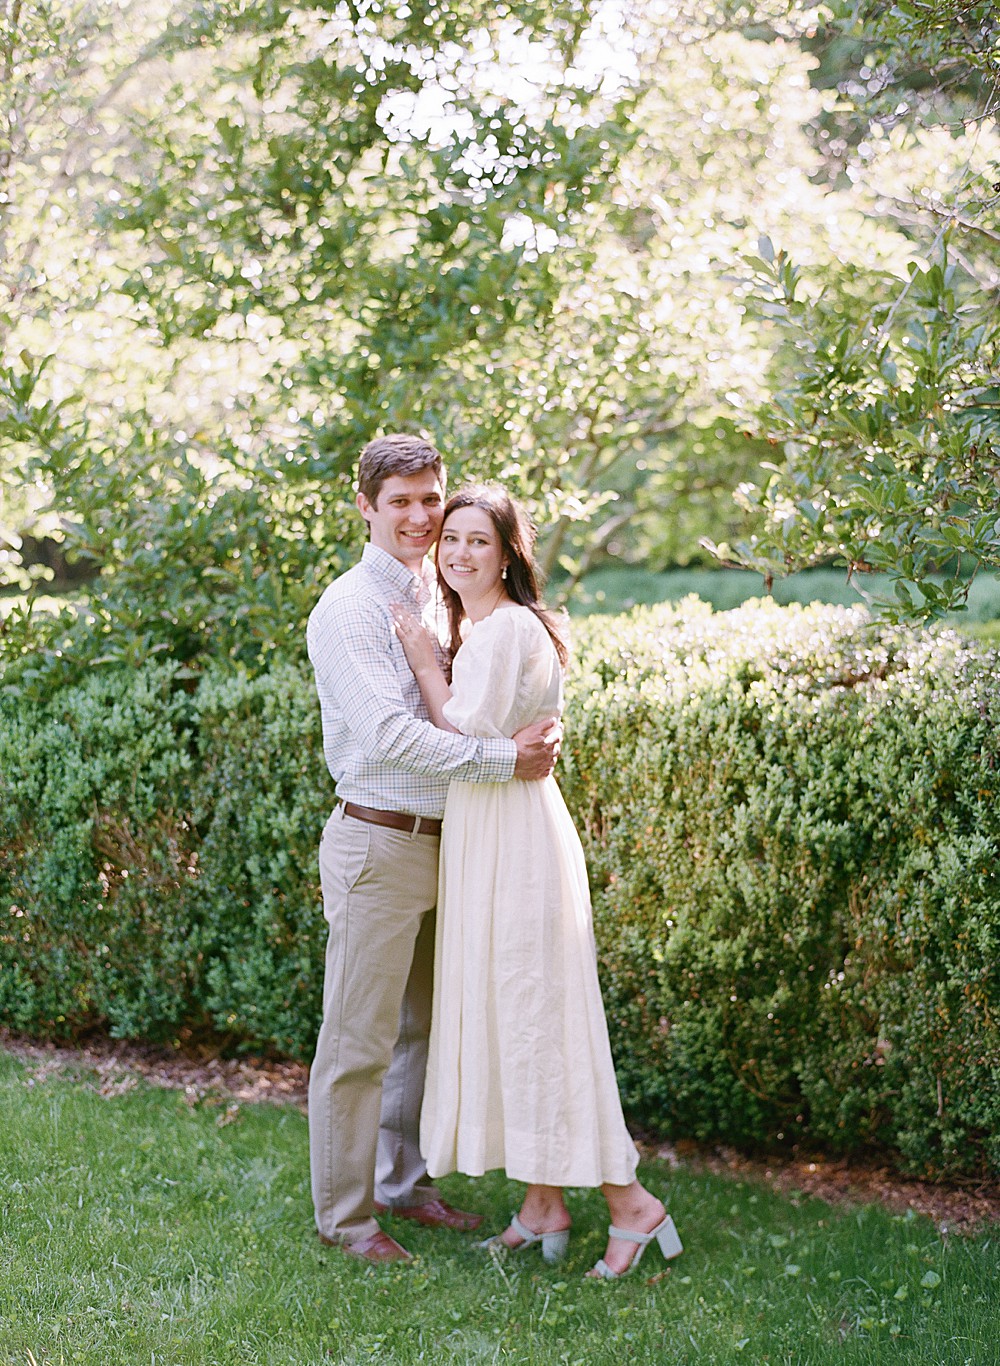 Light and airy, film photography for engagement portraits